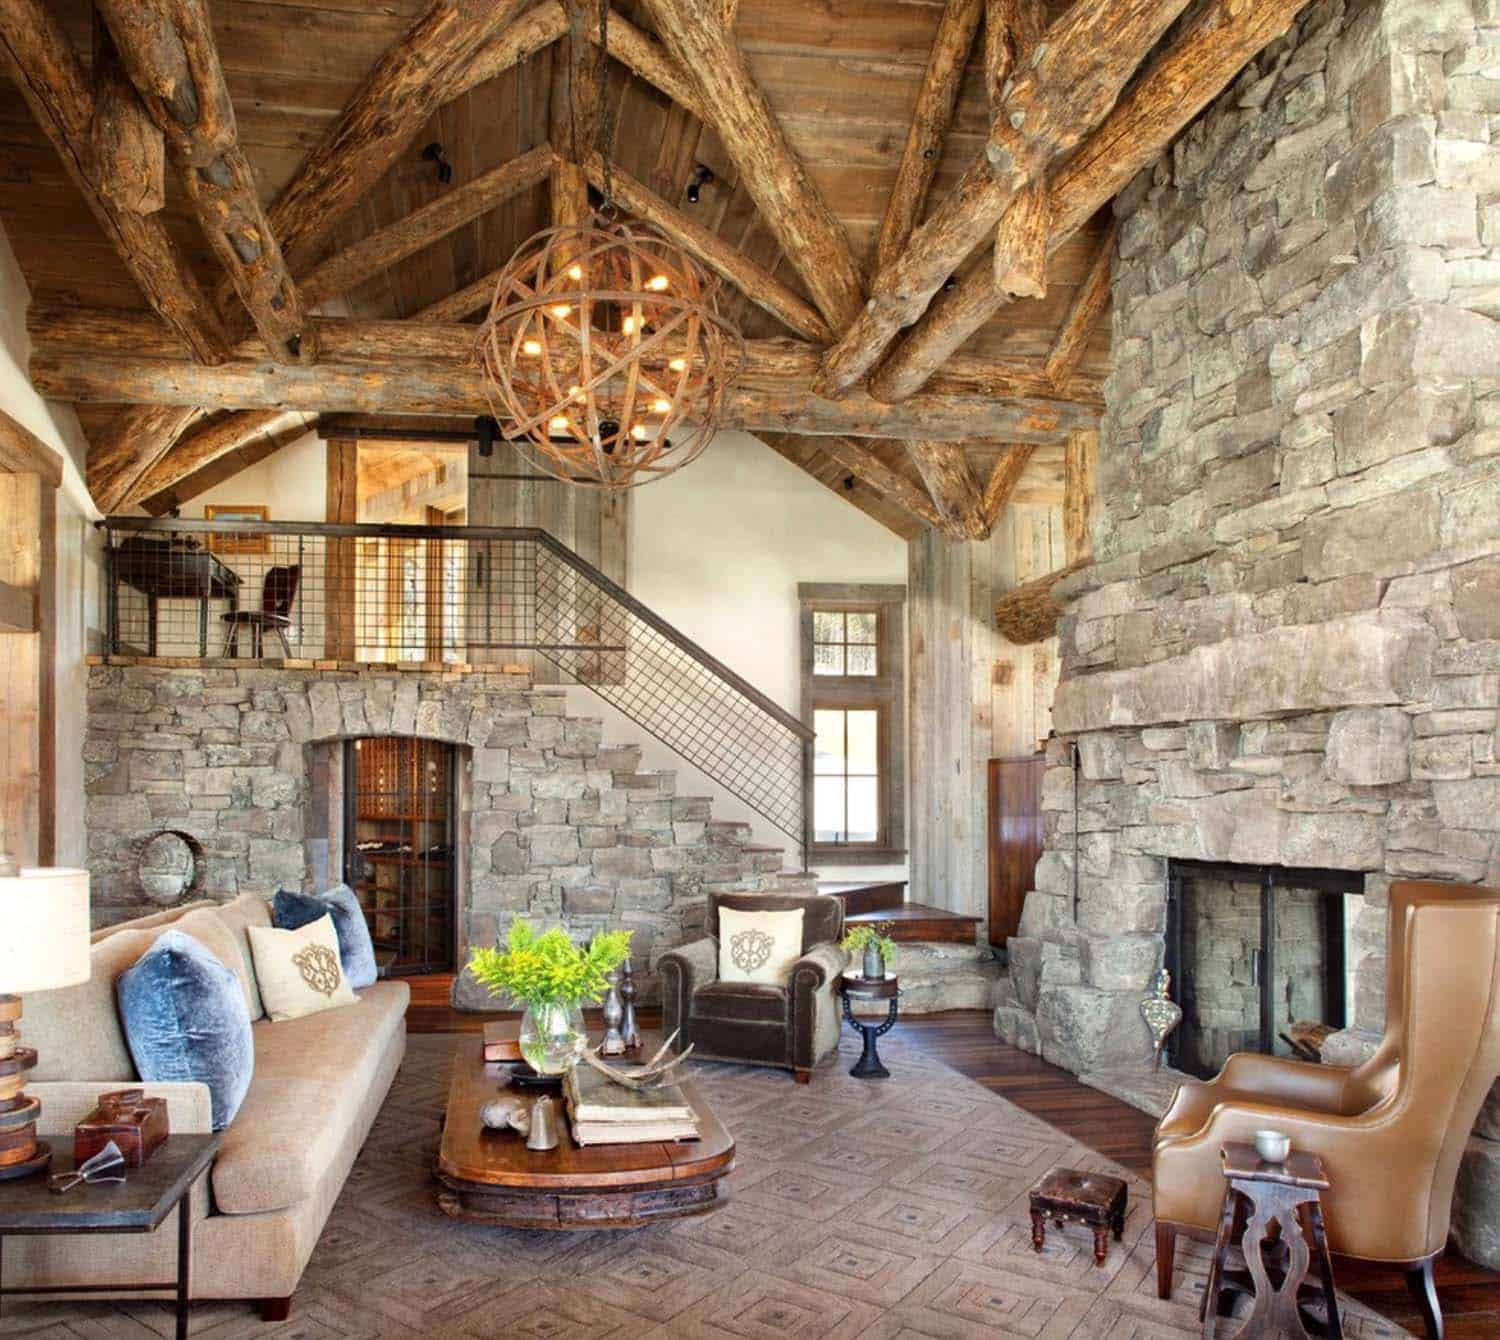 Ski Lodge Hideaway In Montana Boasts Gorgeous Mix Of Rustic And